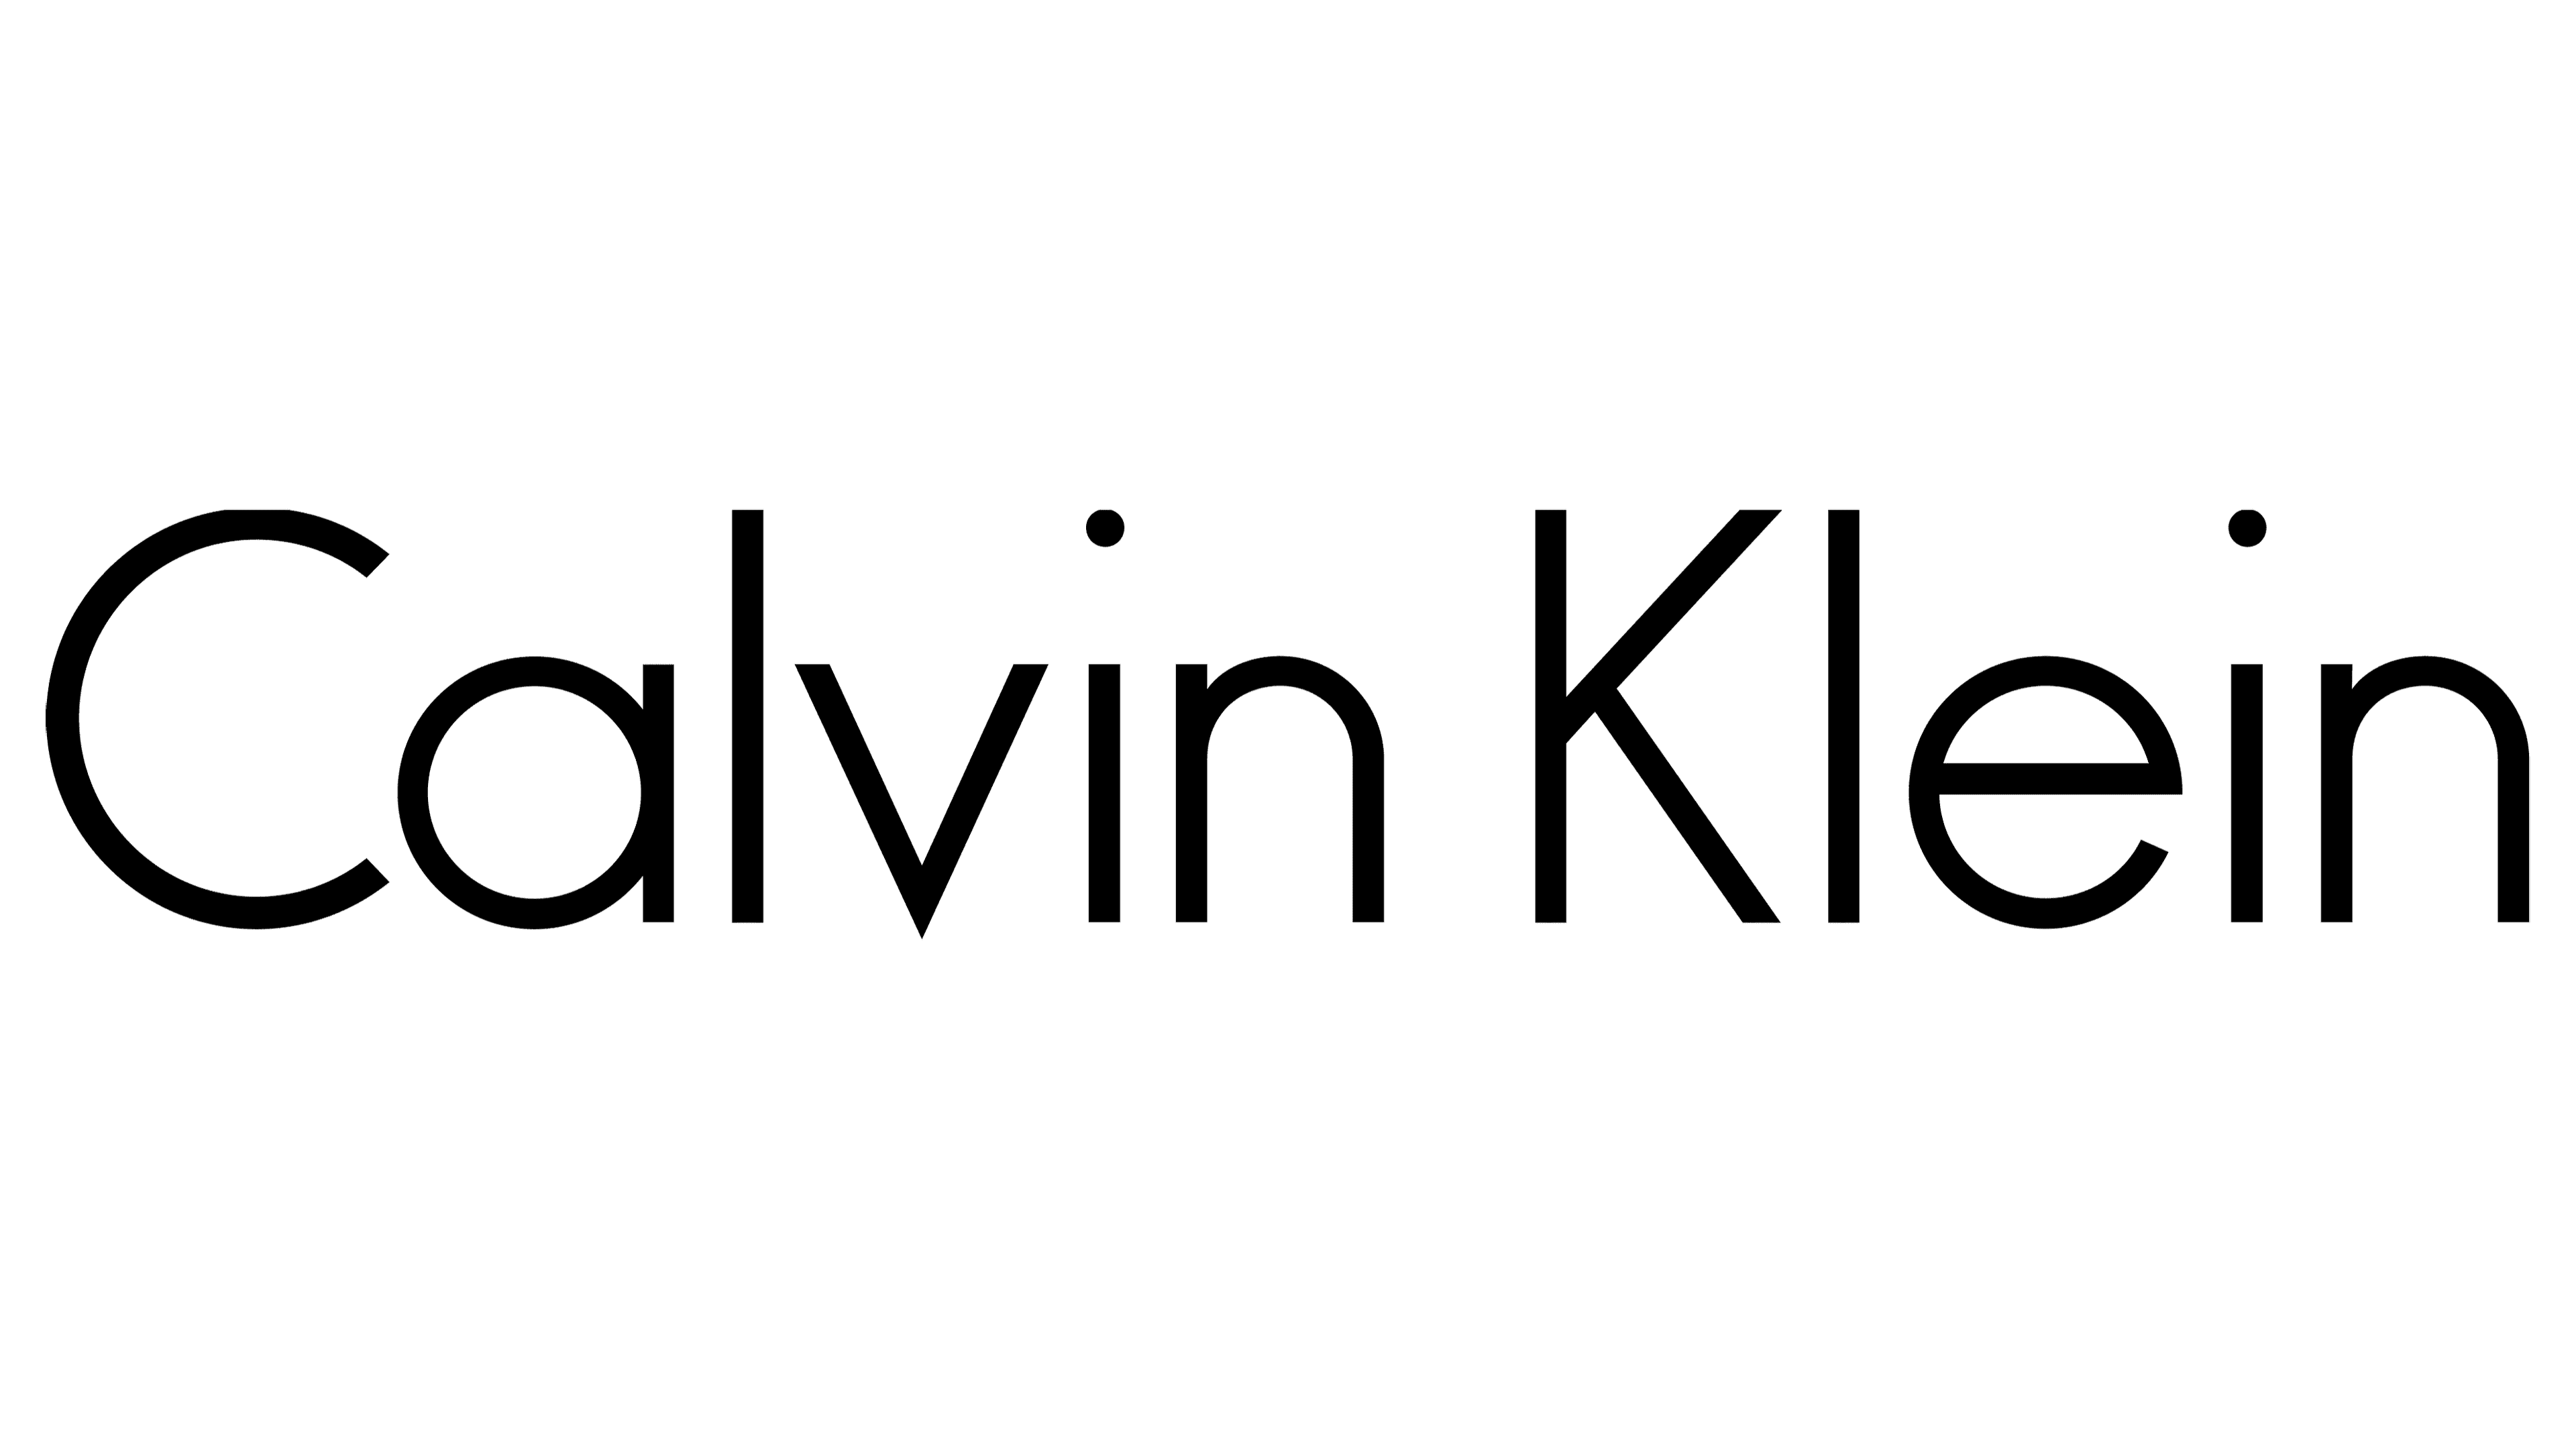 Calvin Klein Logo and symbol, meaning, history, sign.